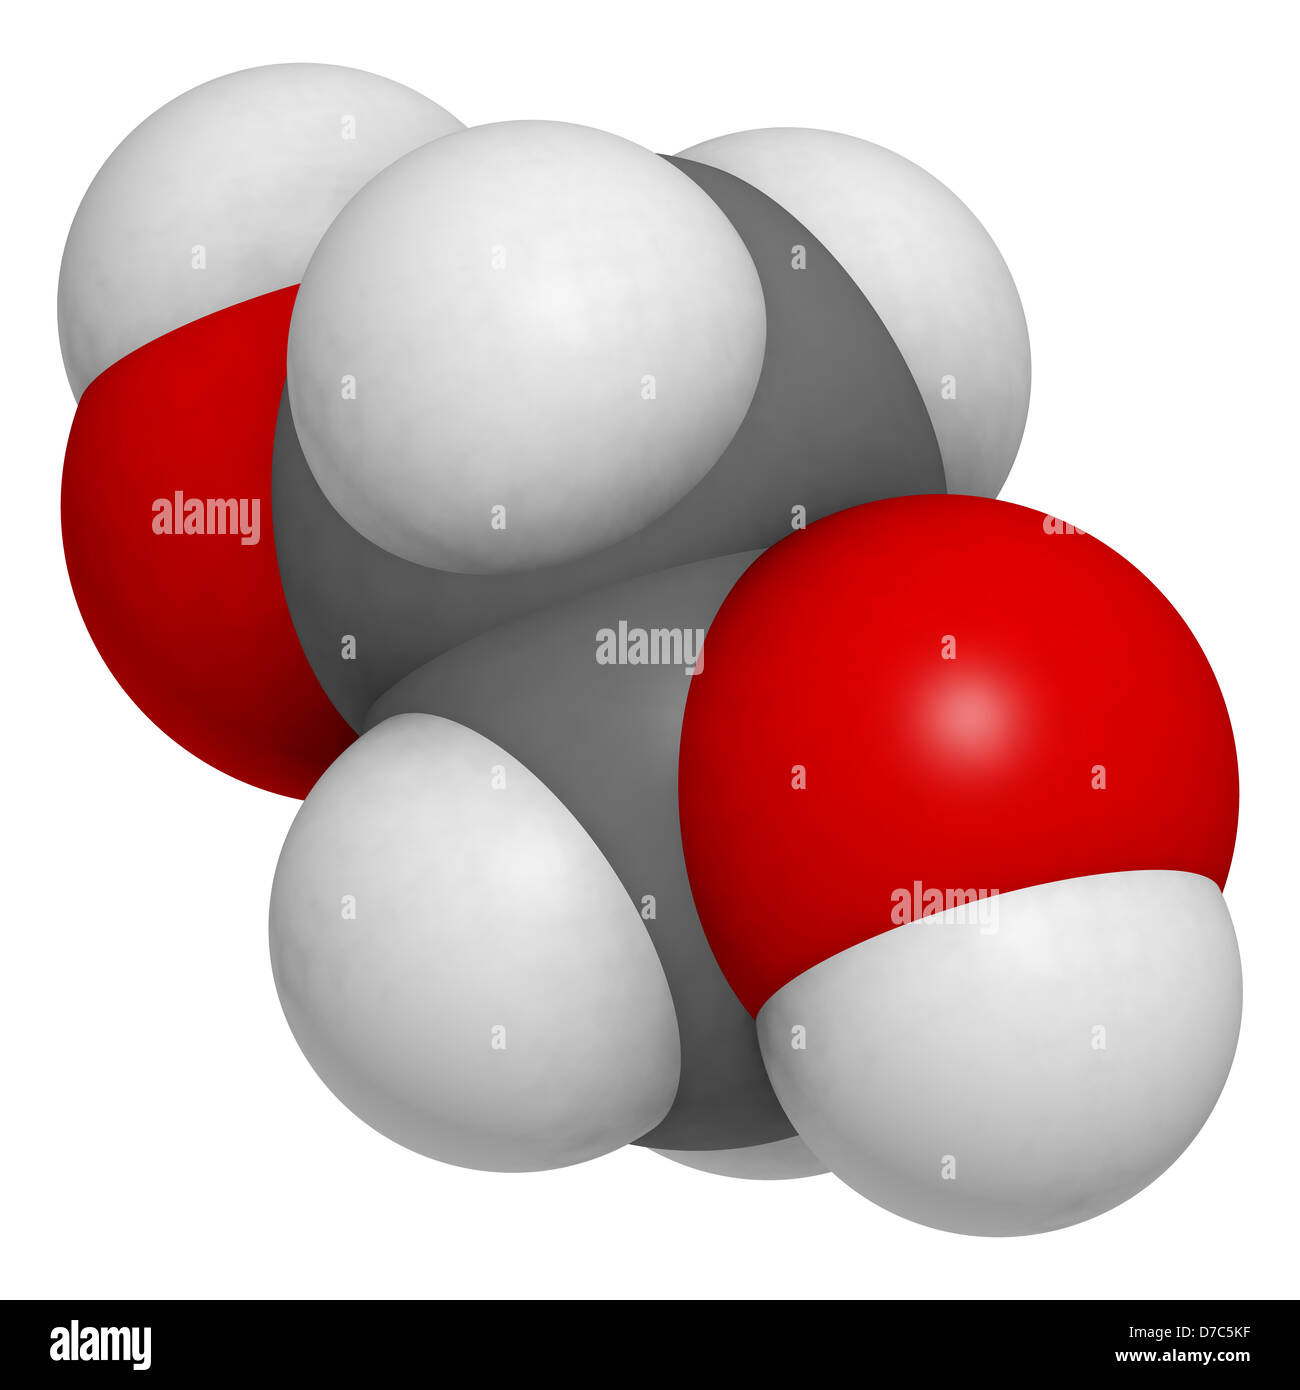 ethylene glycol car antifreeze and polyester building block, molecular model. Atoms are represented as spheres Stock Photo